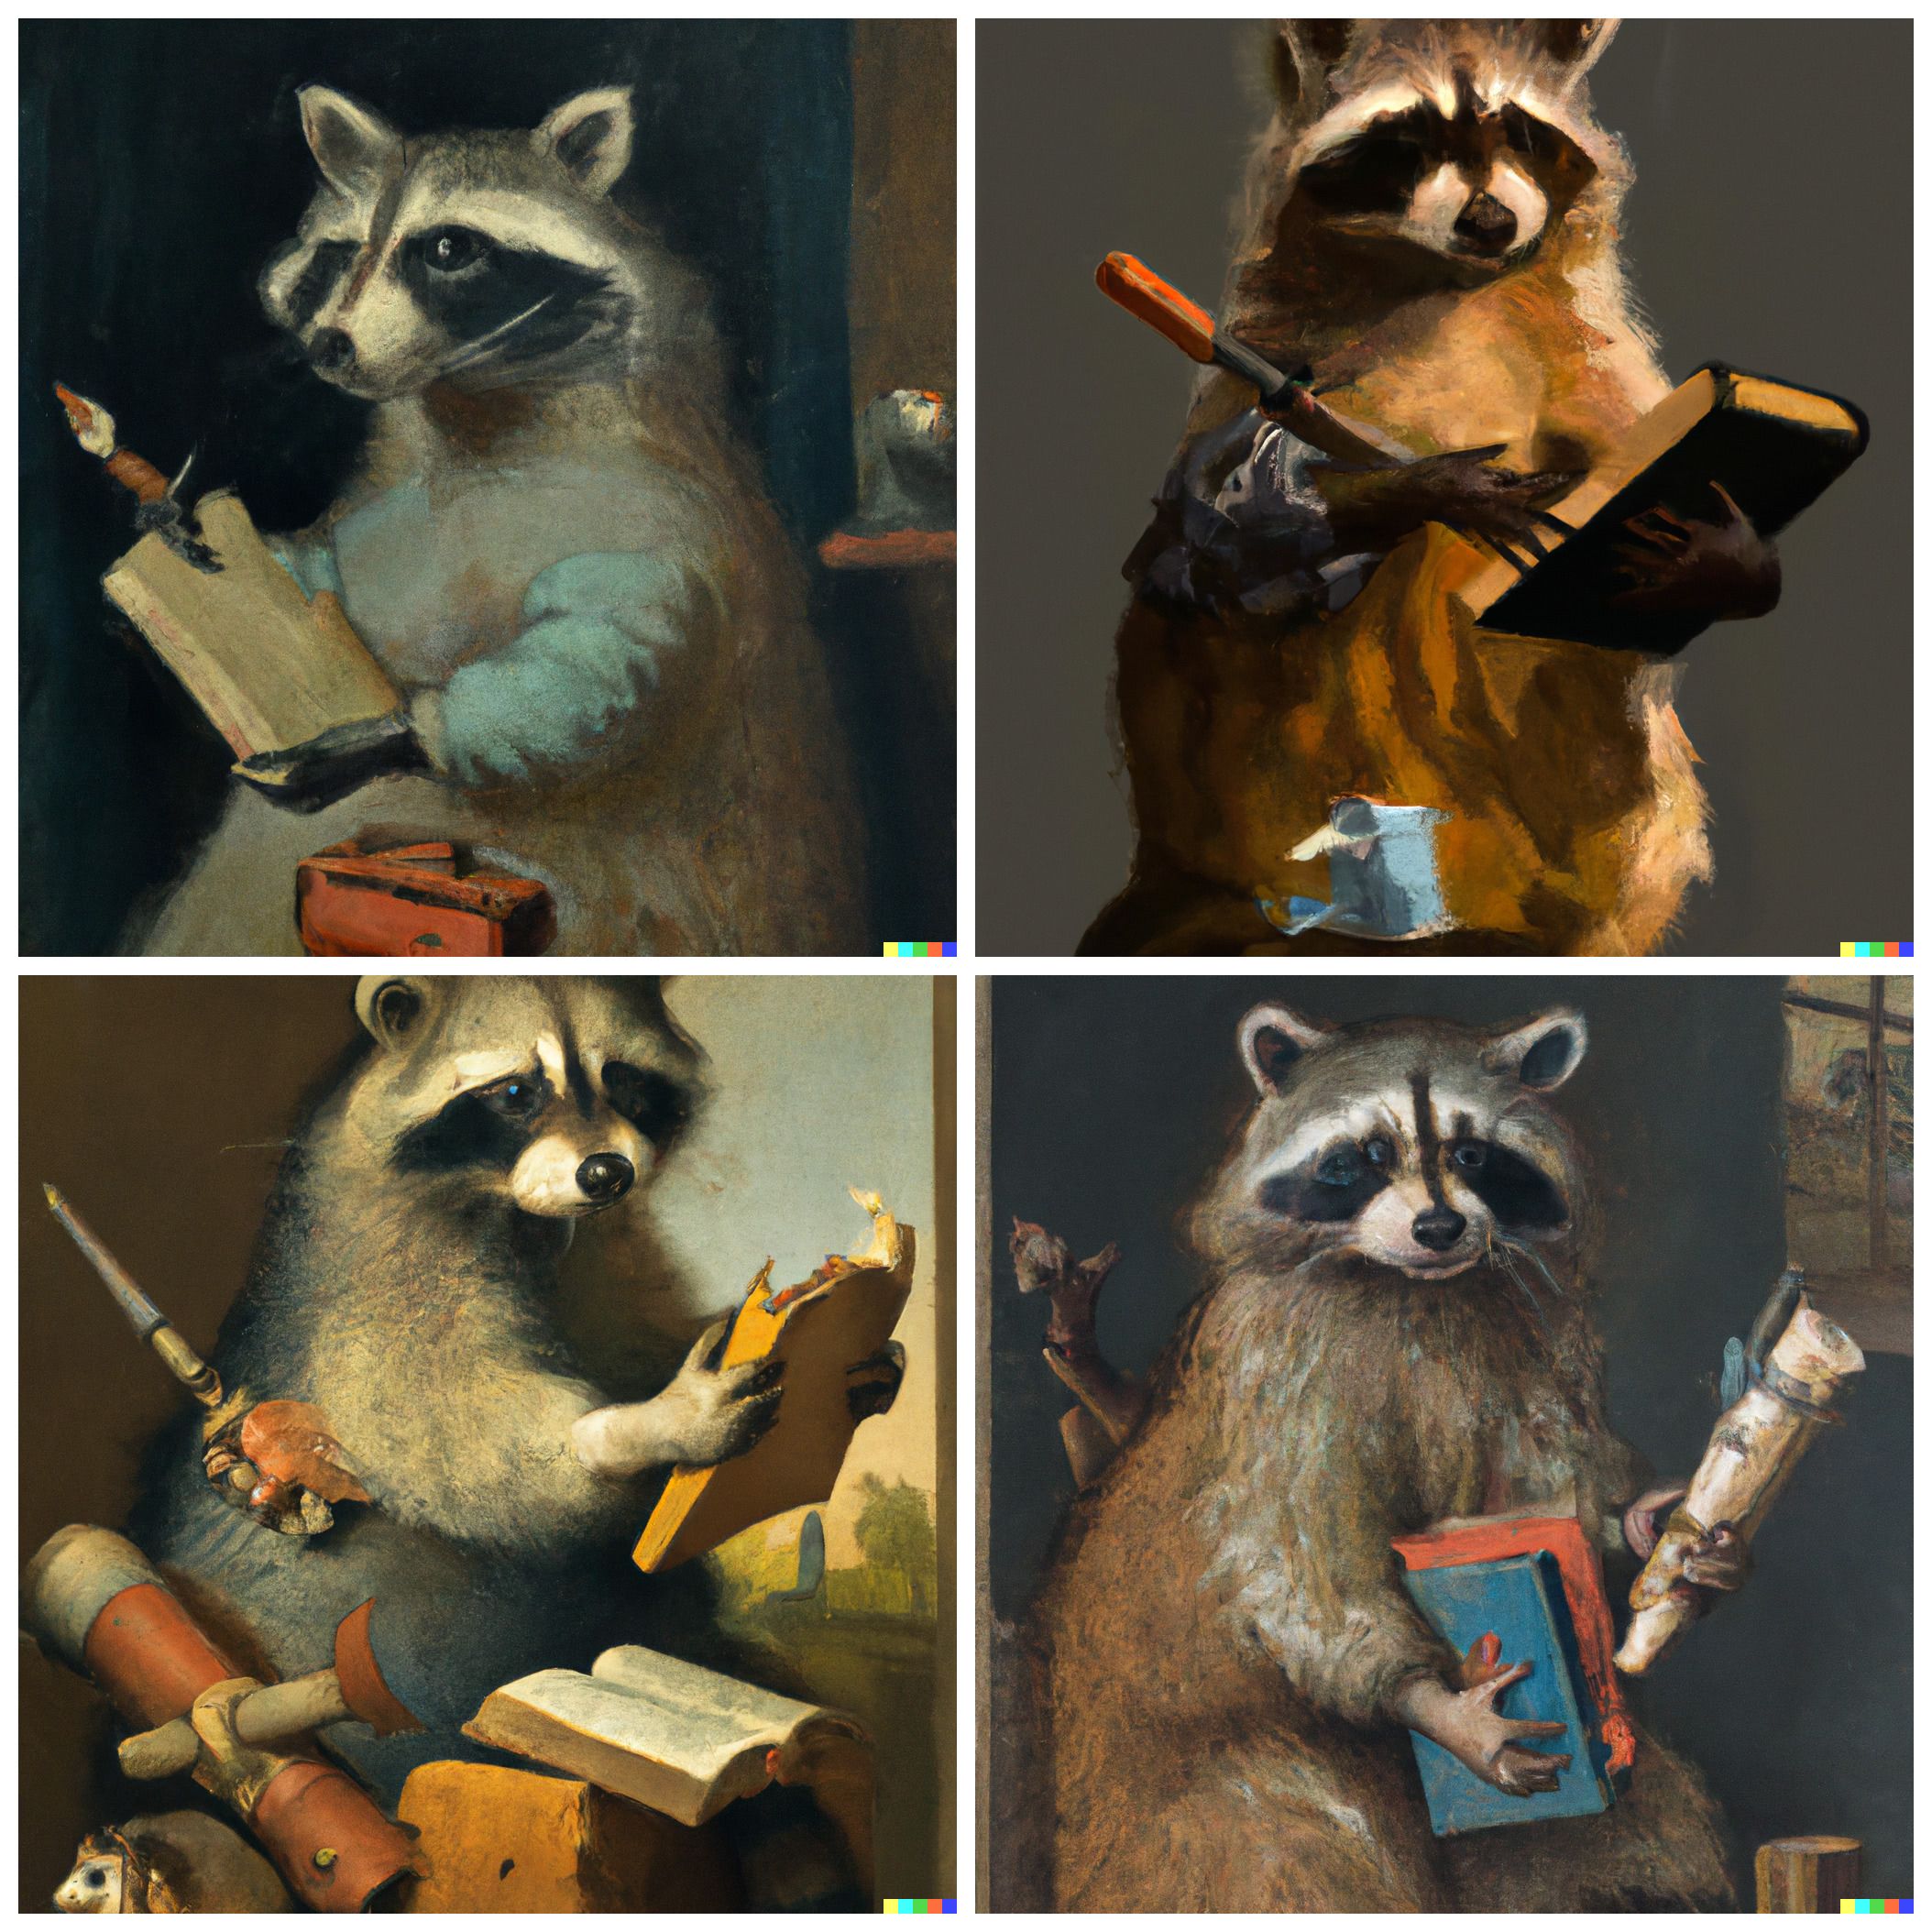 A raccoon with a book in one hand and a pistol in its other hand by Johannes Vermeer